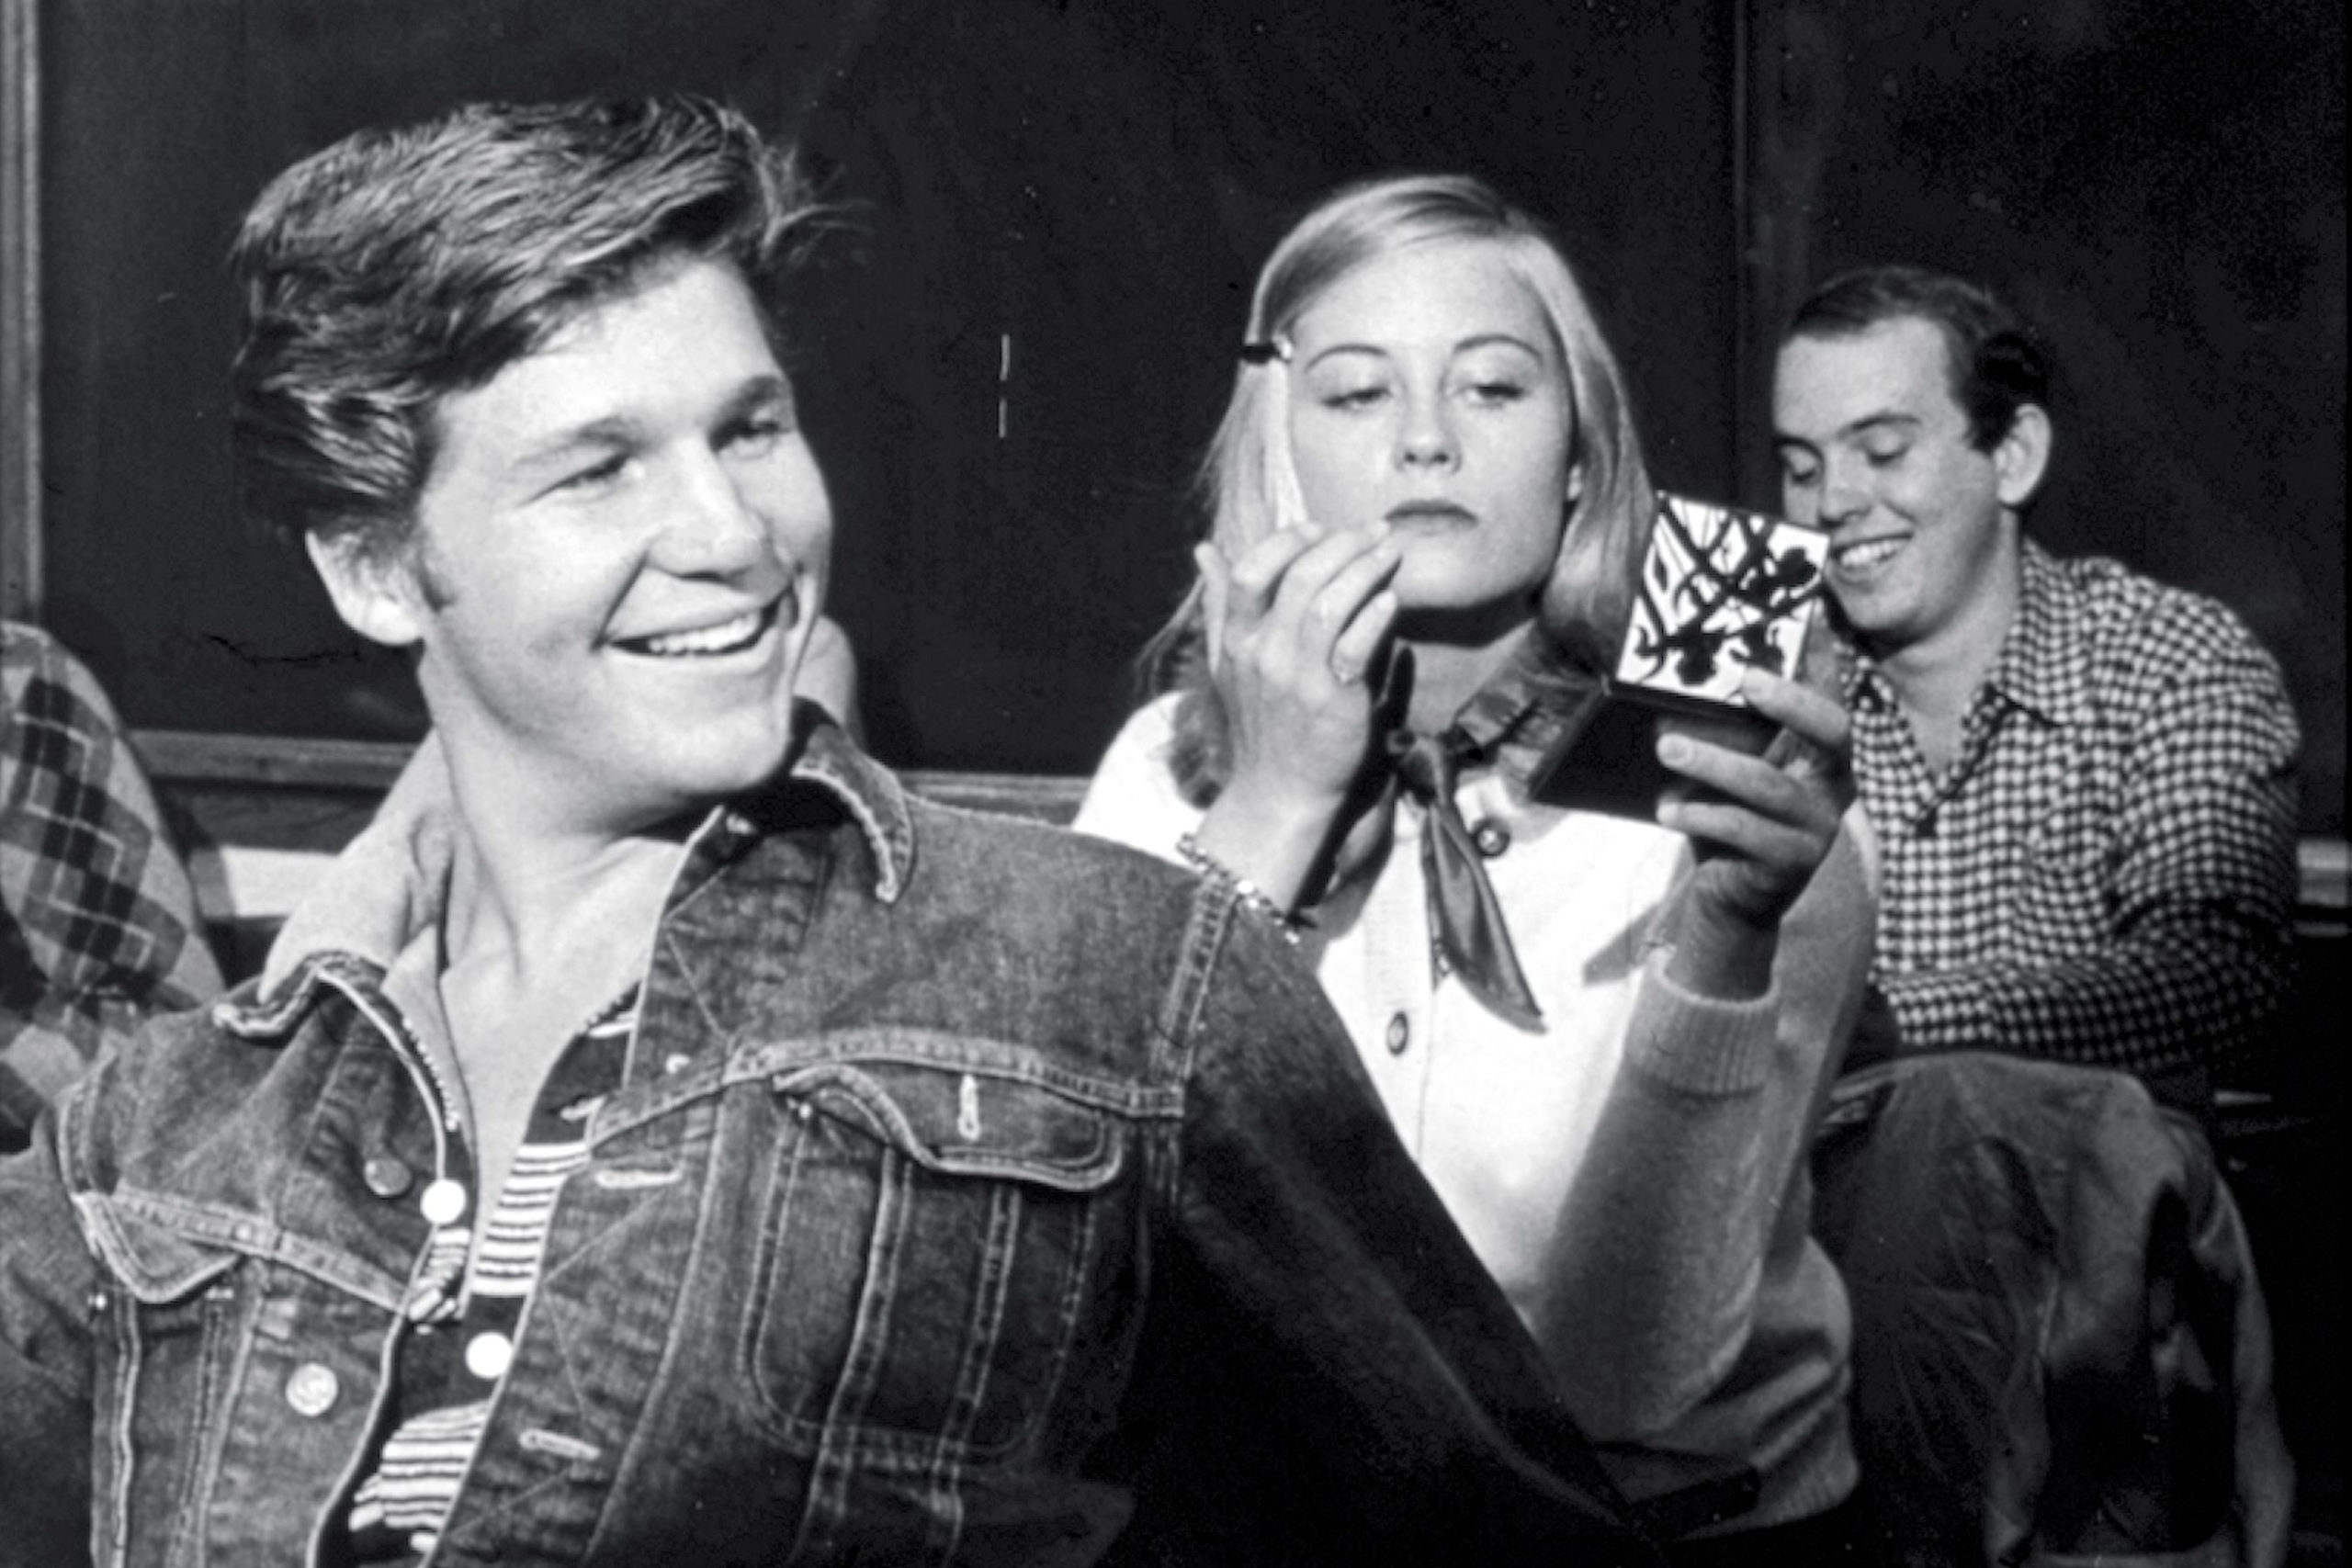 A still image from “The Last Picture Show,” by Peter Bogdanovich (1971).